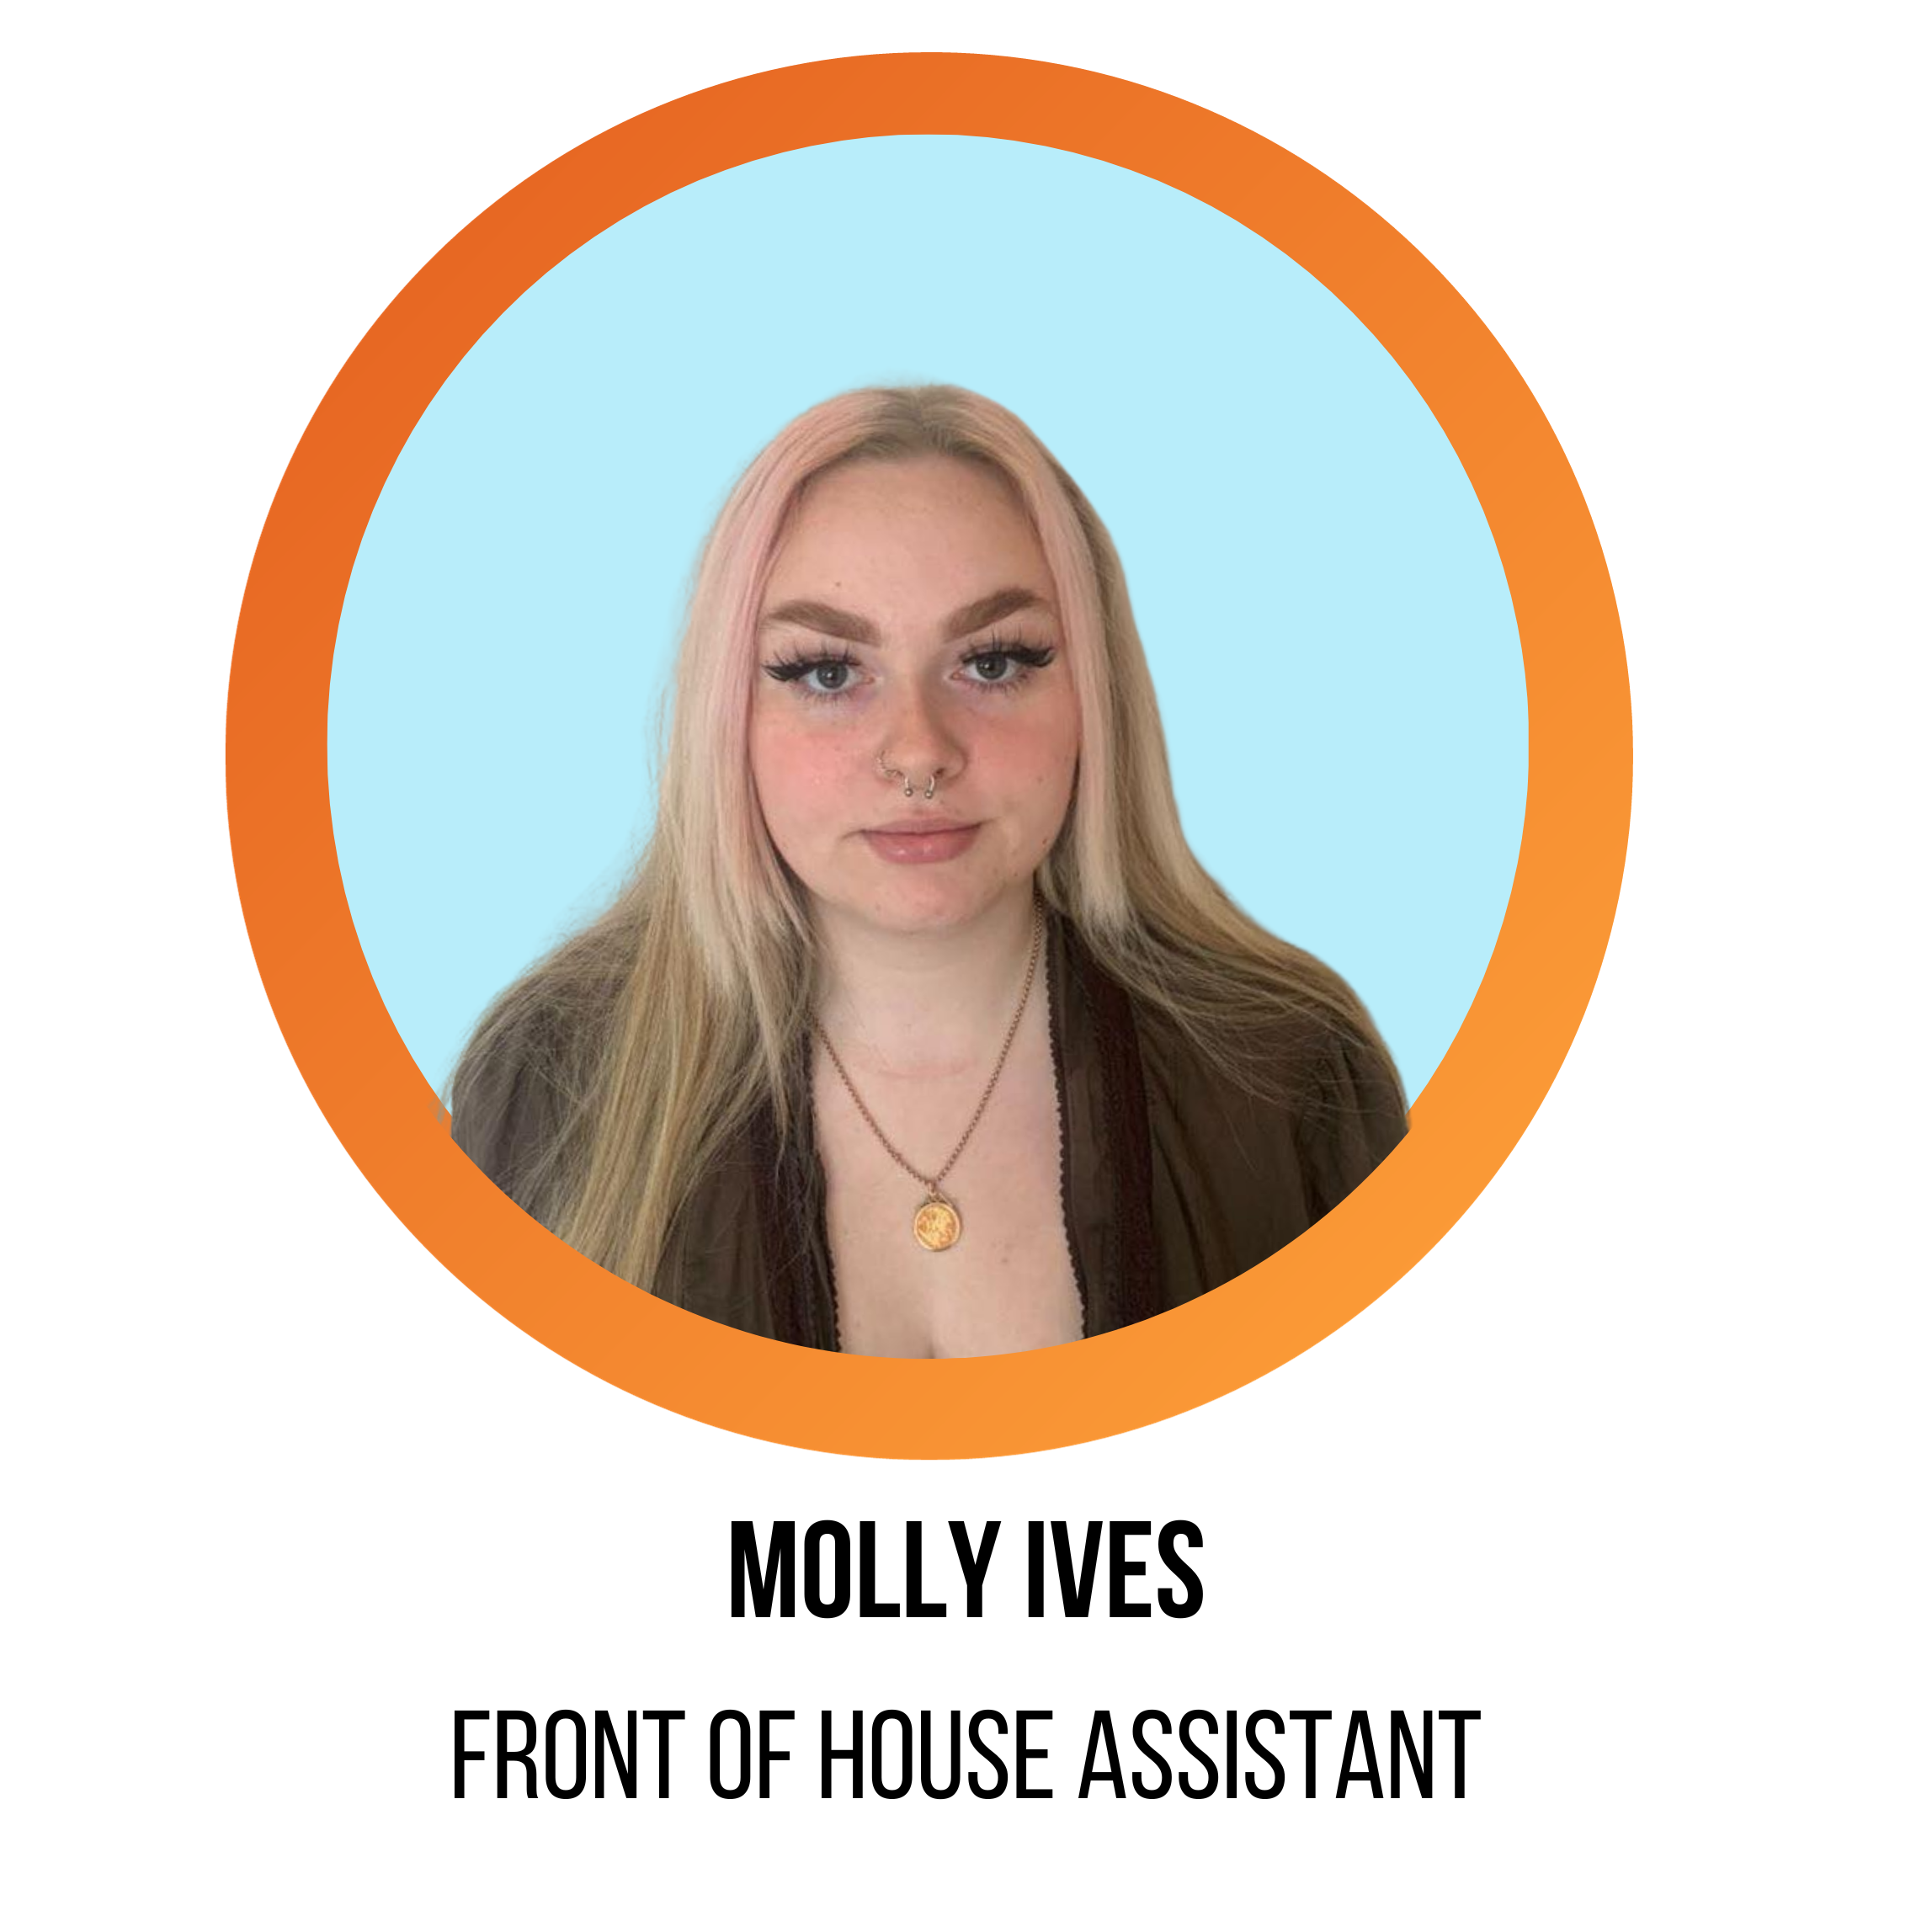 molly ives, front of house assistant, smiling in front of a blue background